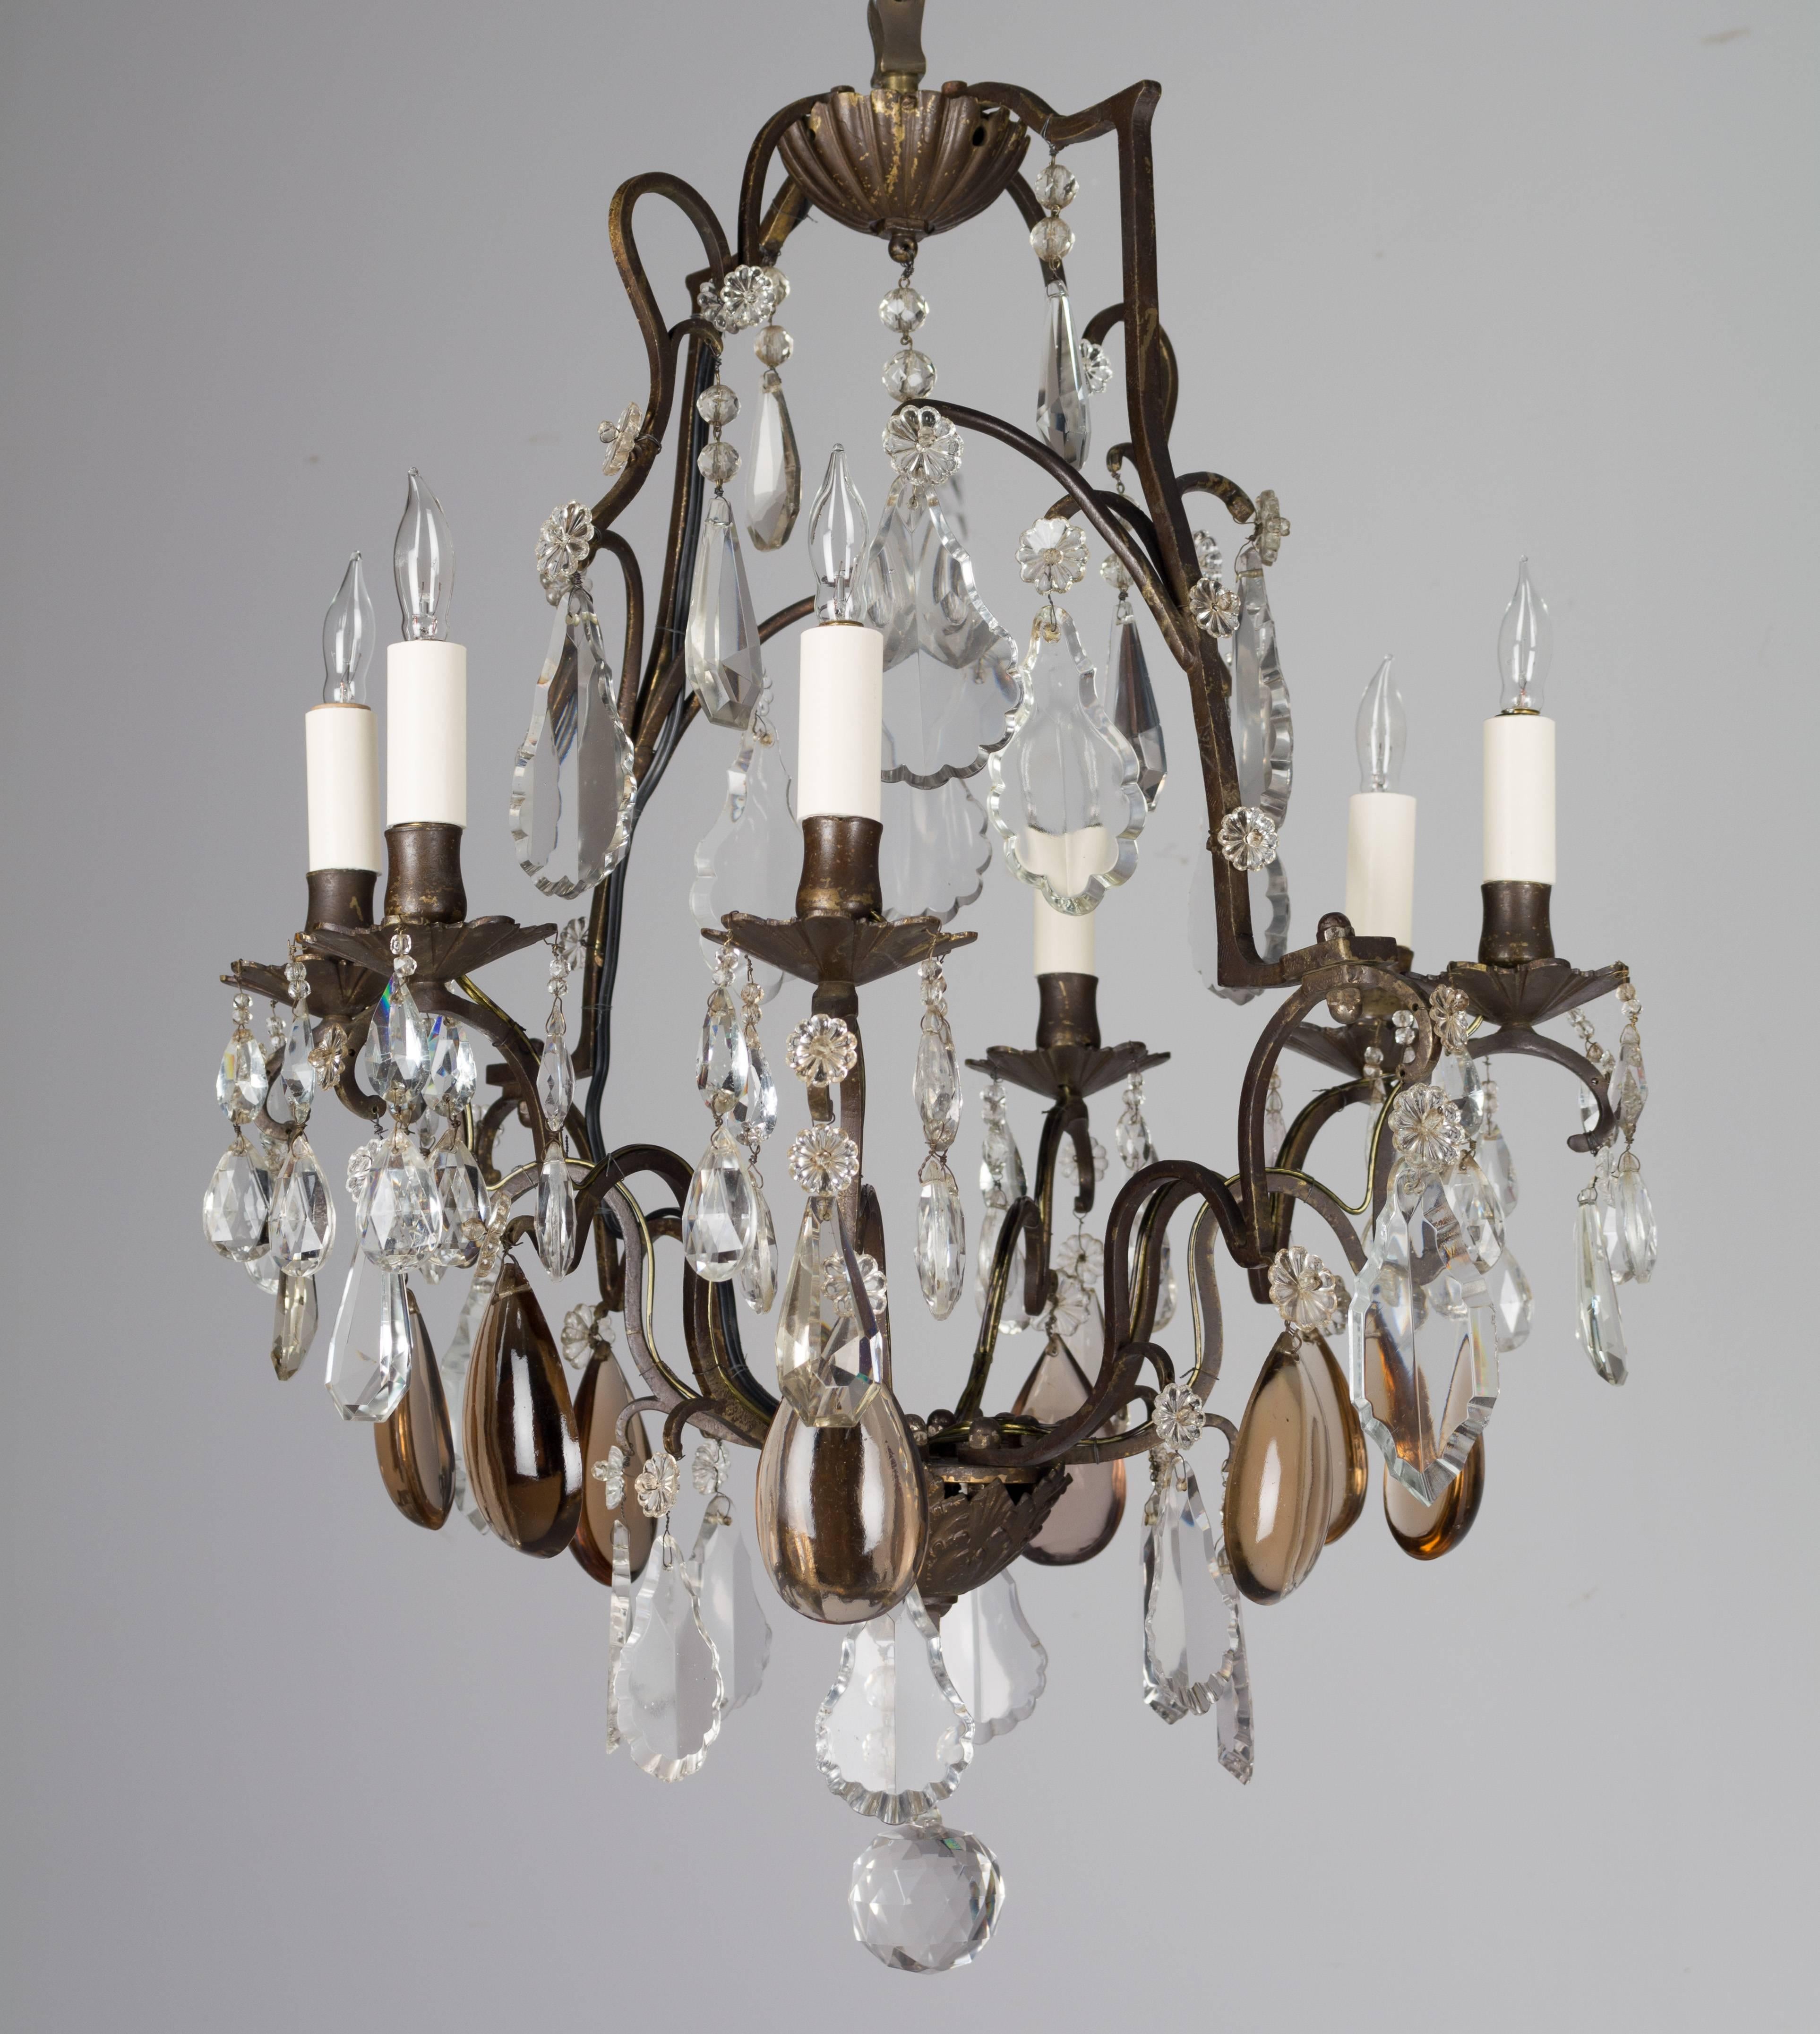 19th century French six-light chandelier with a variety of faceted crystal prisms, rosettes and large amber glass pendalogues. Retaining the original patina. Rewired with American sockets.
More photos available upon request. We have a large